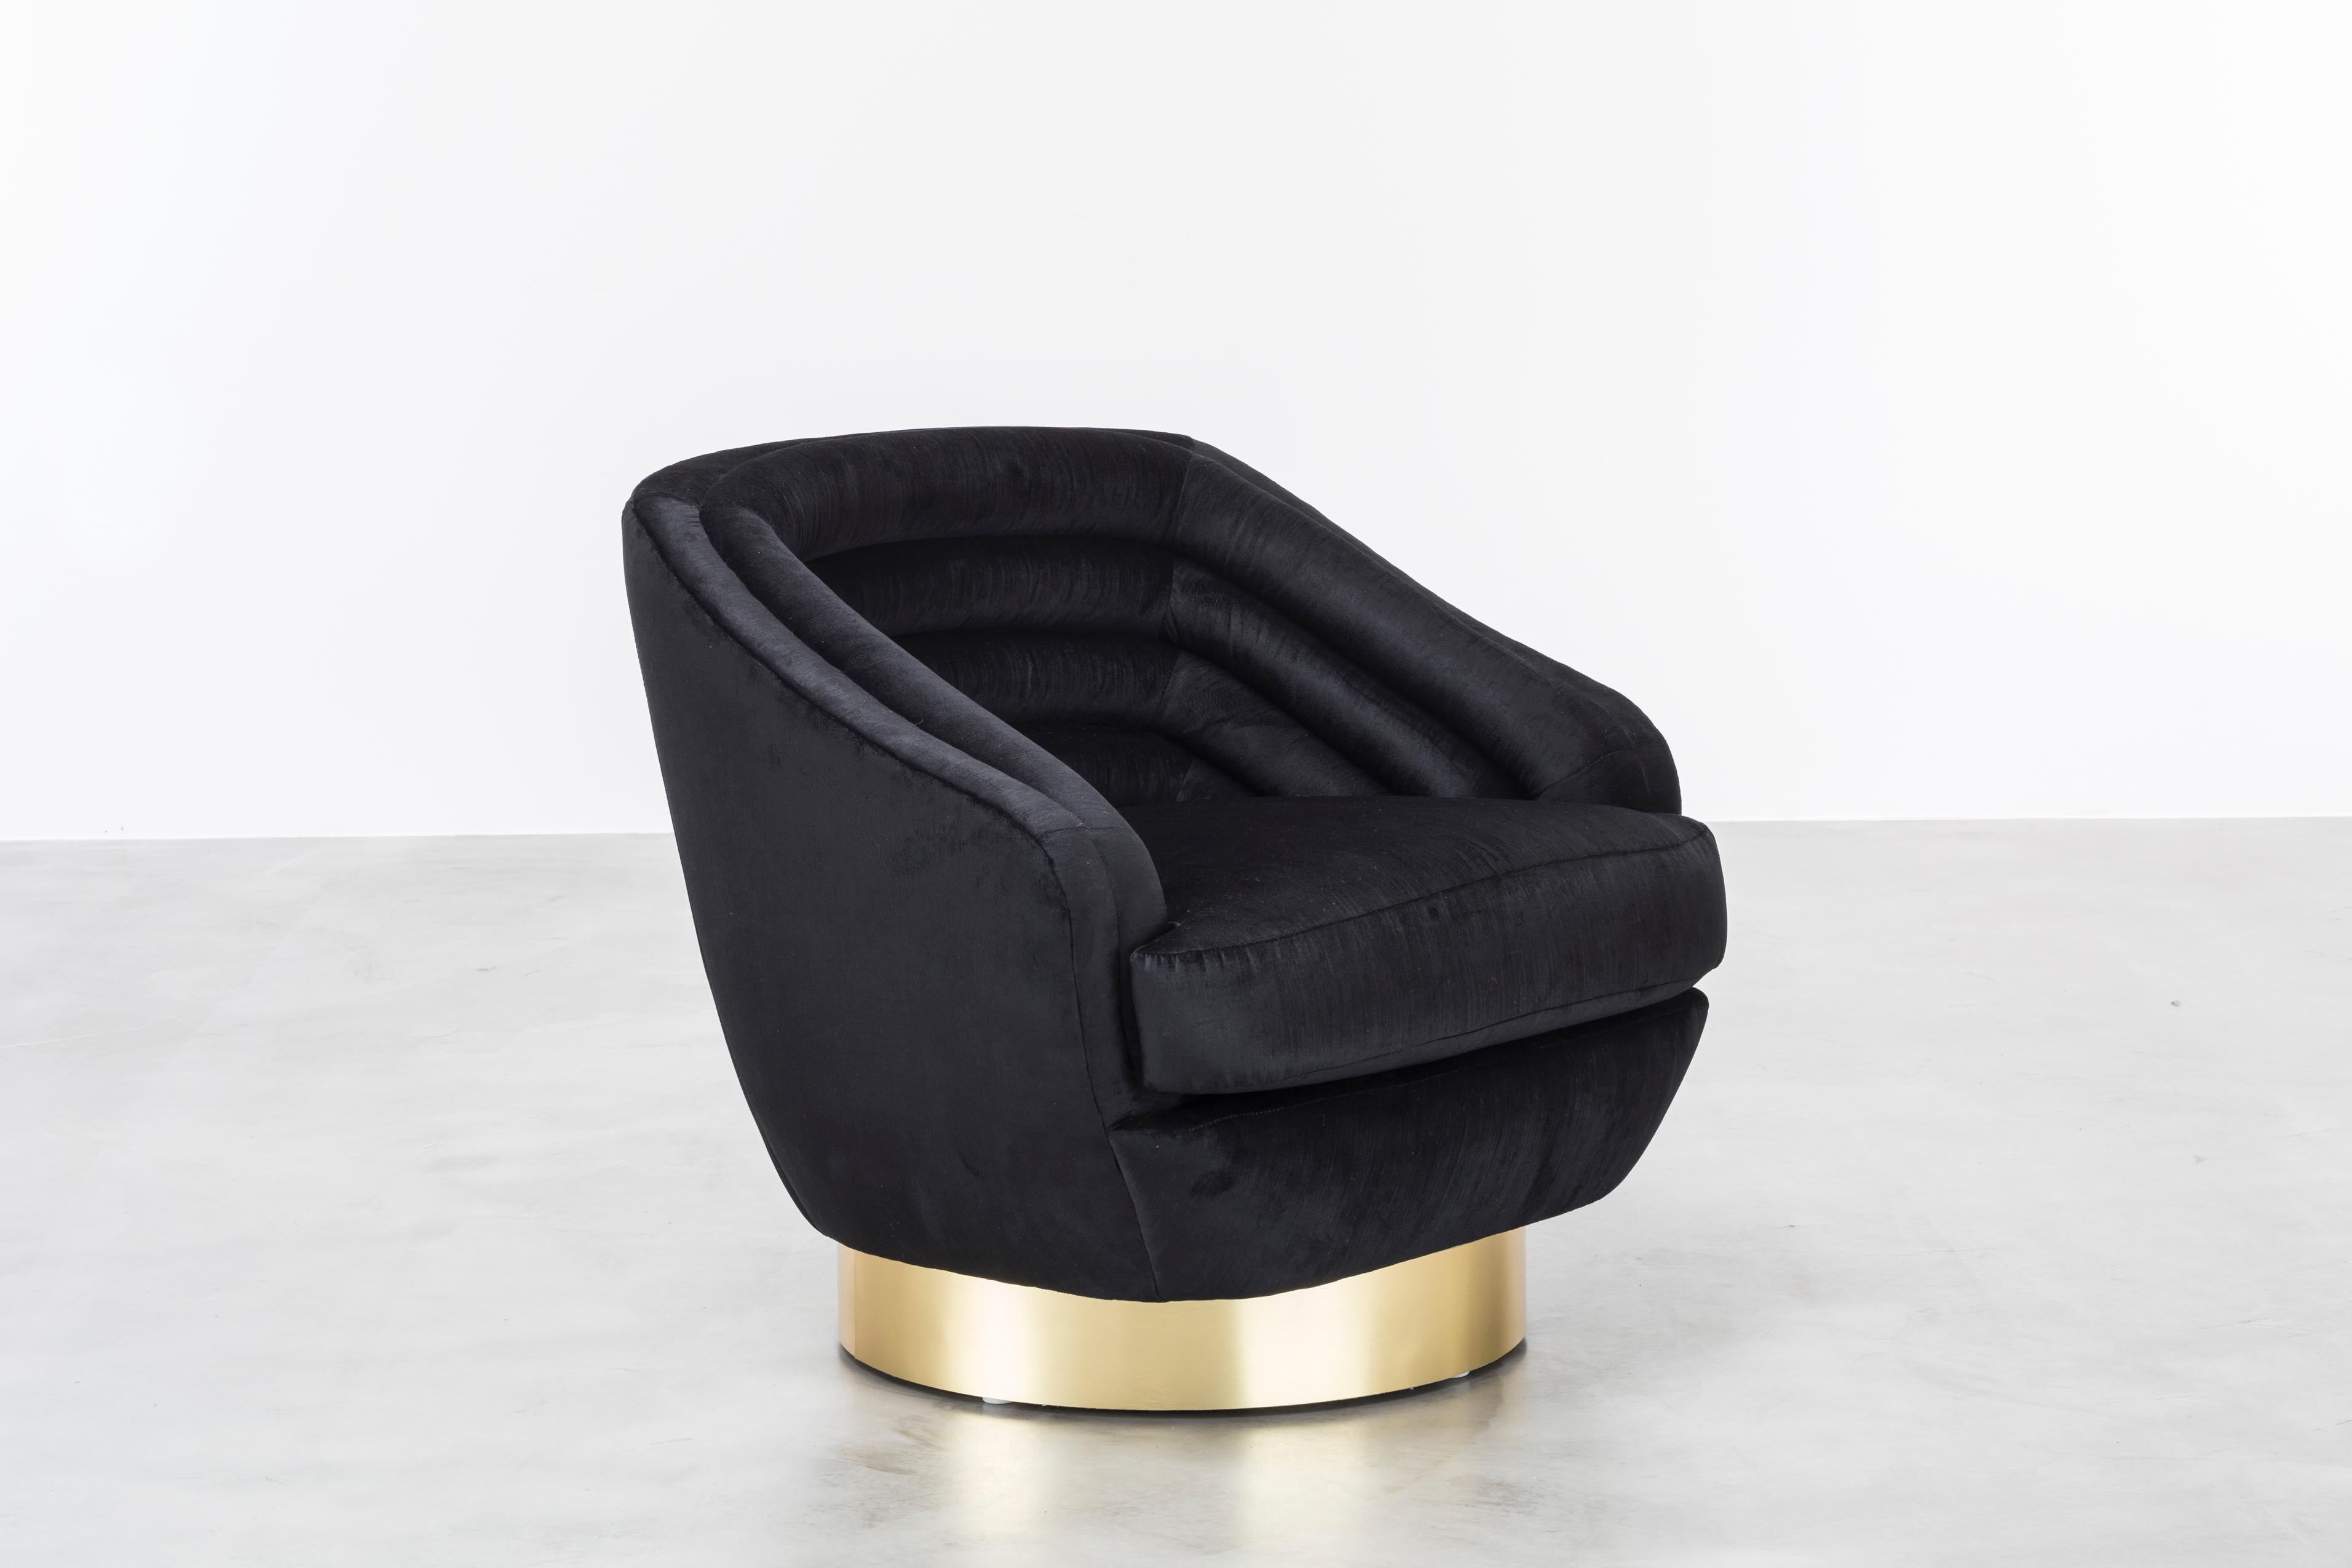 RAOUL SWIVEL CHAIR - Modern Black Velvet Chair on Brass Swivel Plinth Base

The Raoul chair is a stunning piece of furniture inspired by Jean Paul Gaultier's Haute Couture. This chair features horizontal velvet channels that create a chic and